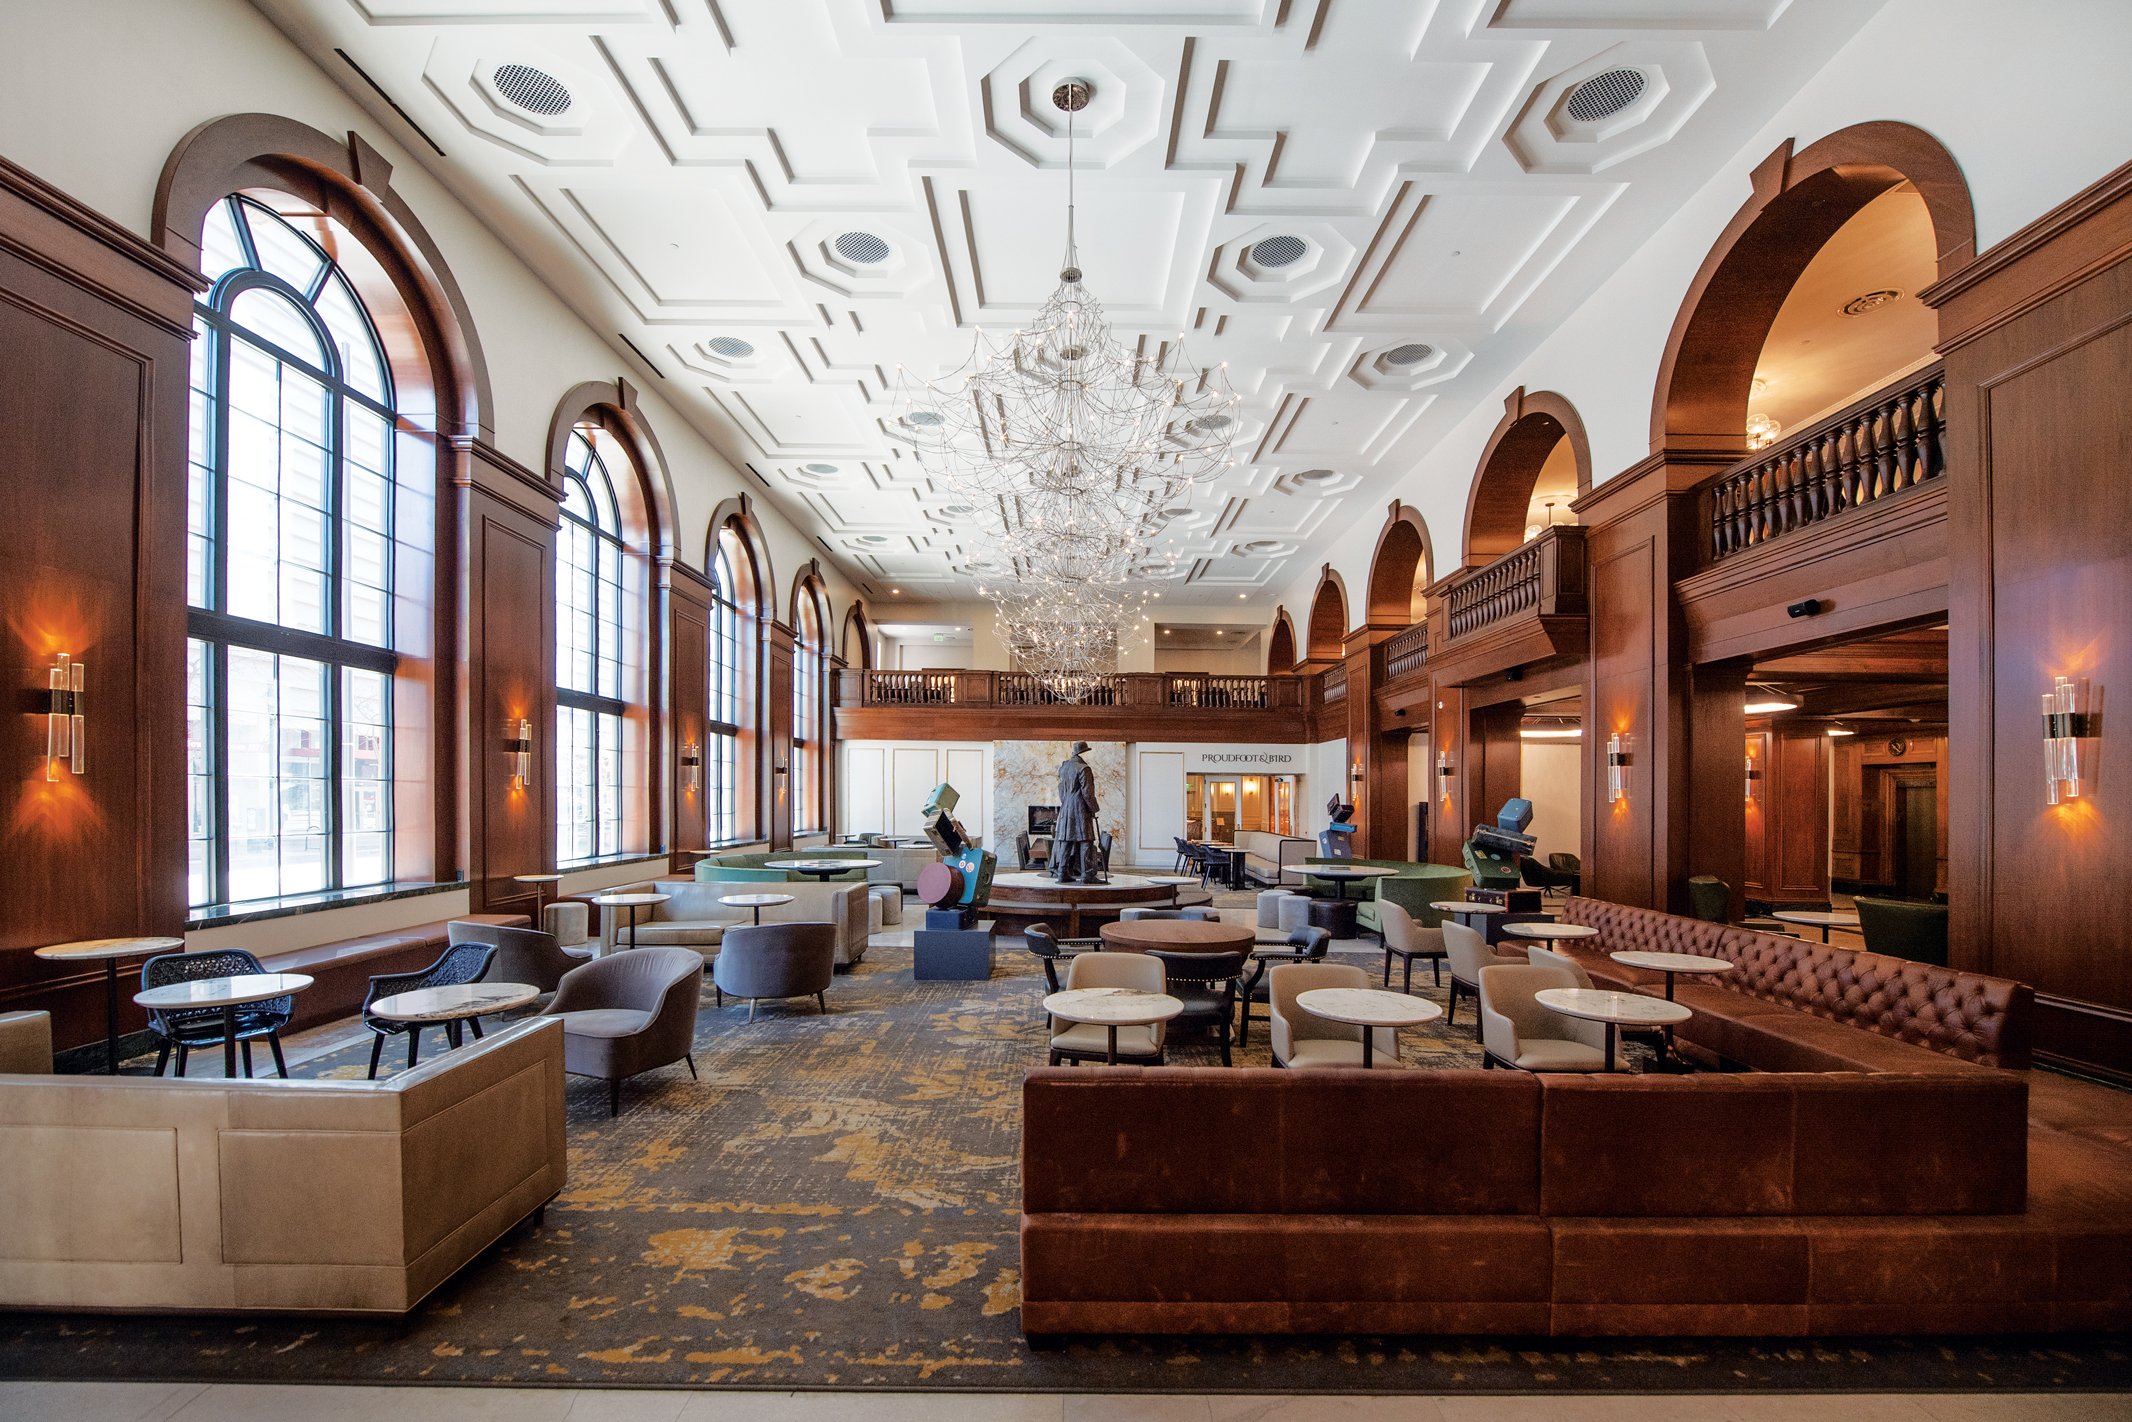  The lobby ceiling was one of many original parts of the building that required careful decision-making to determine whether it was possible to match the blueprints exactly or if it was more realistic to use modern touches in the renovation.   